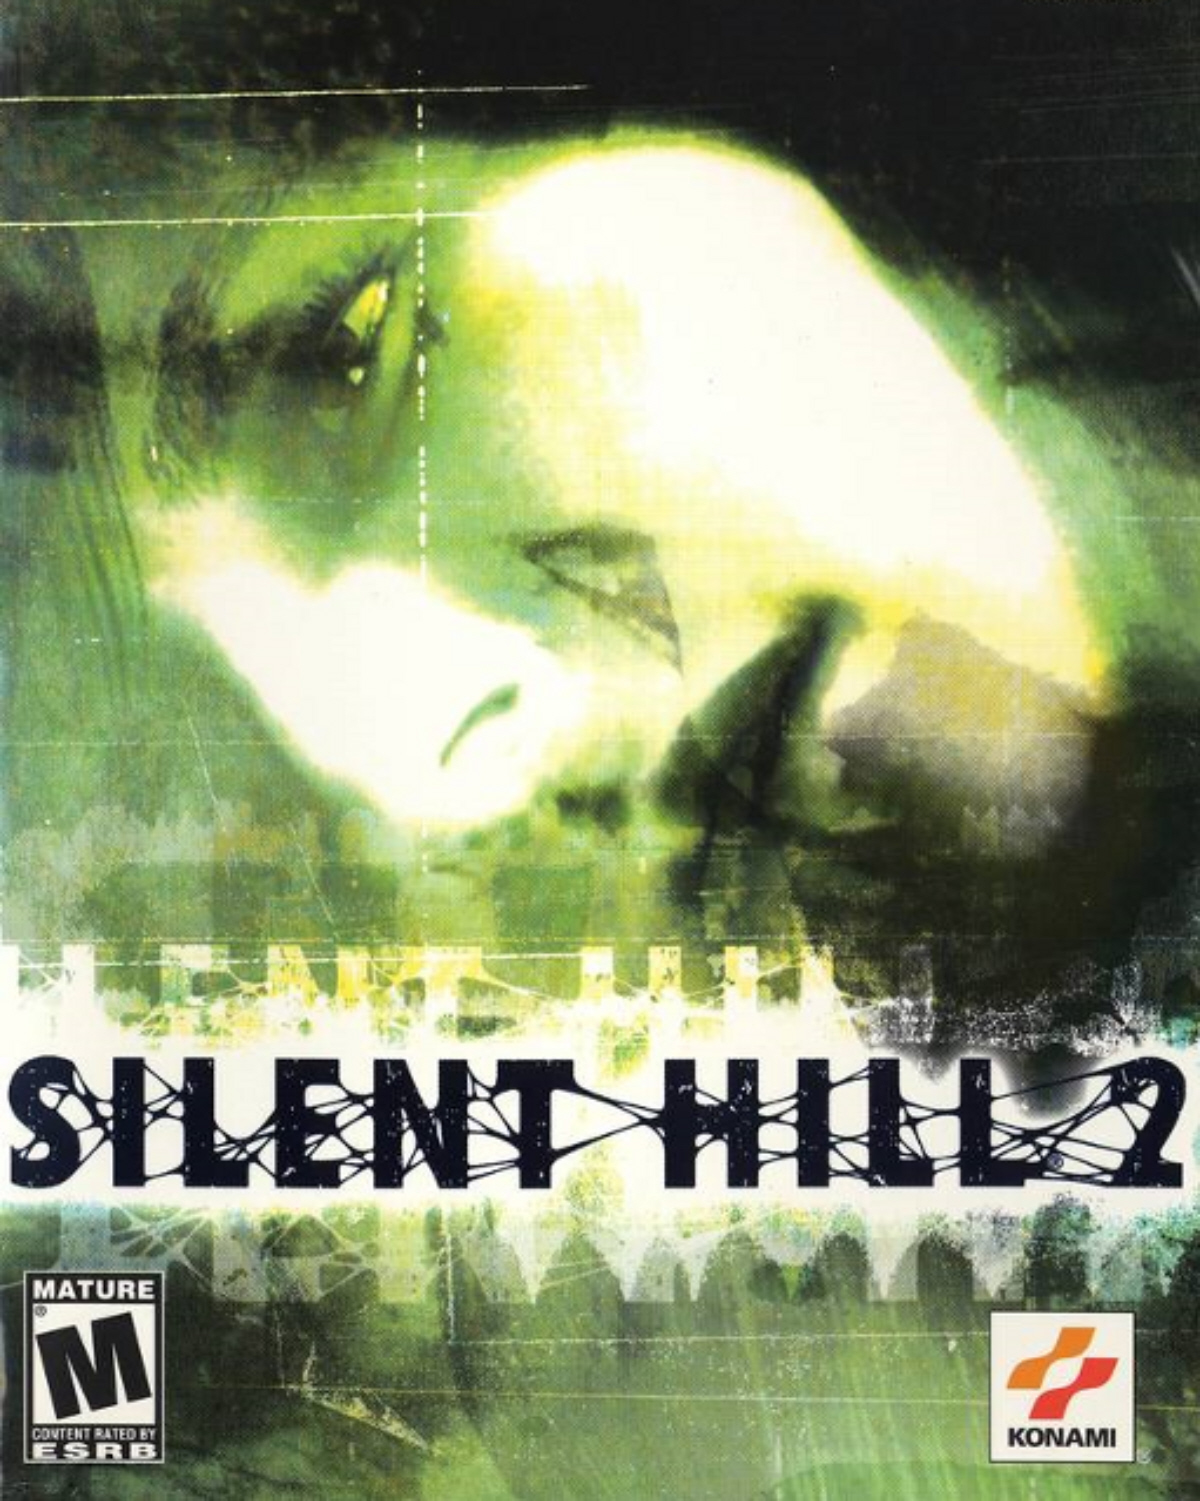 silent hill 1 download pc